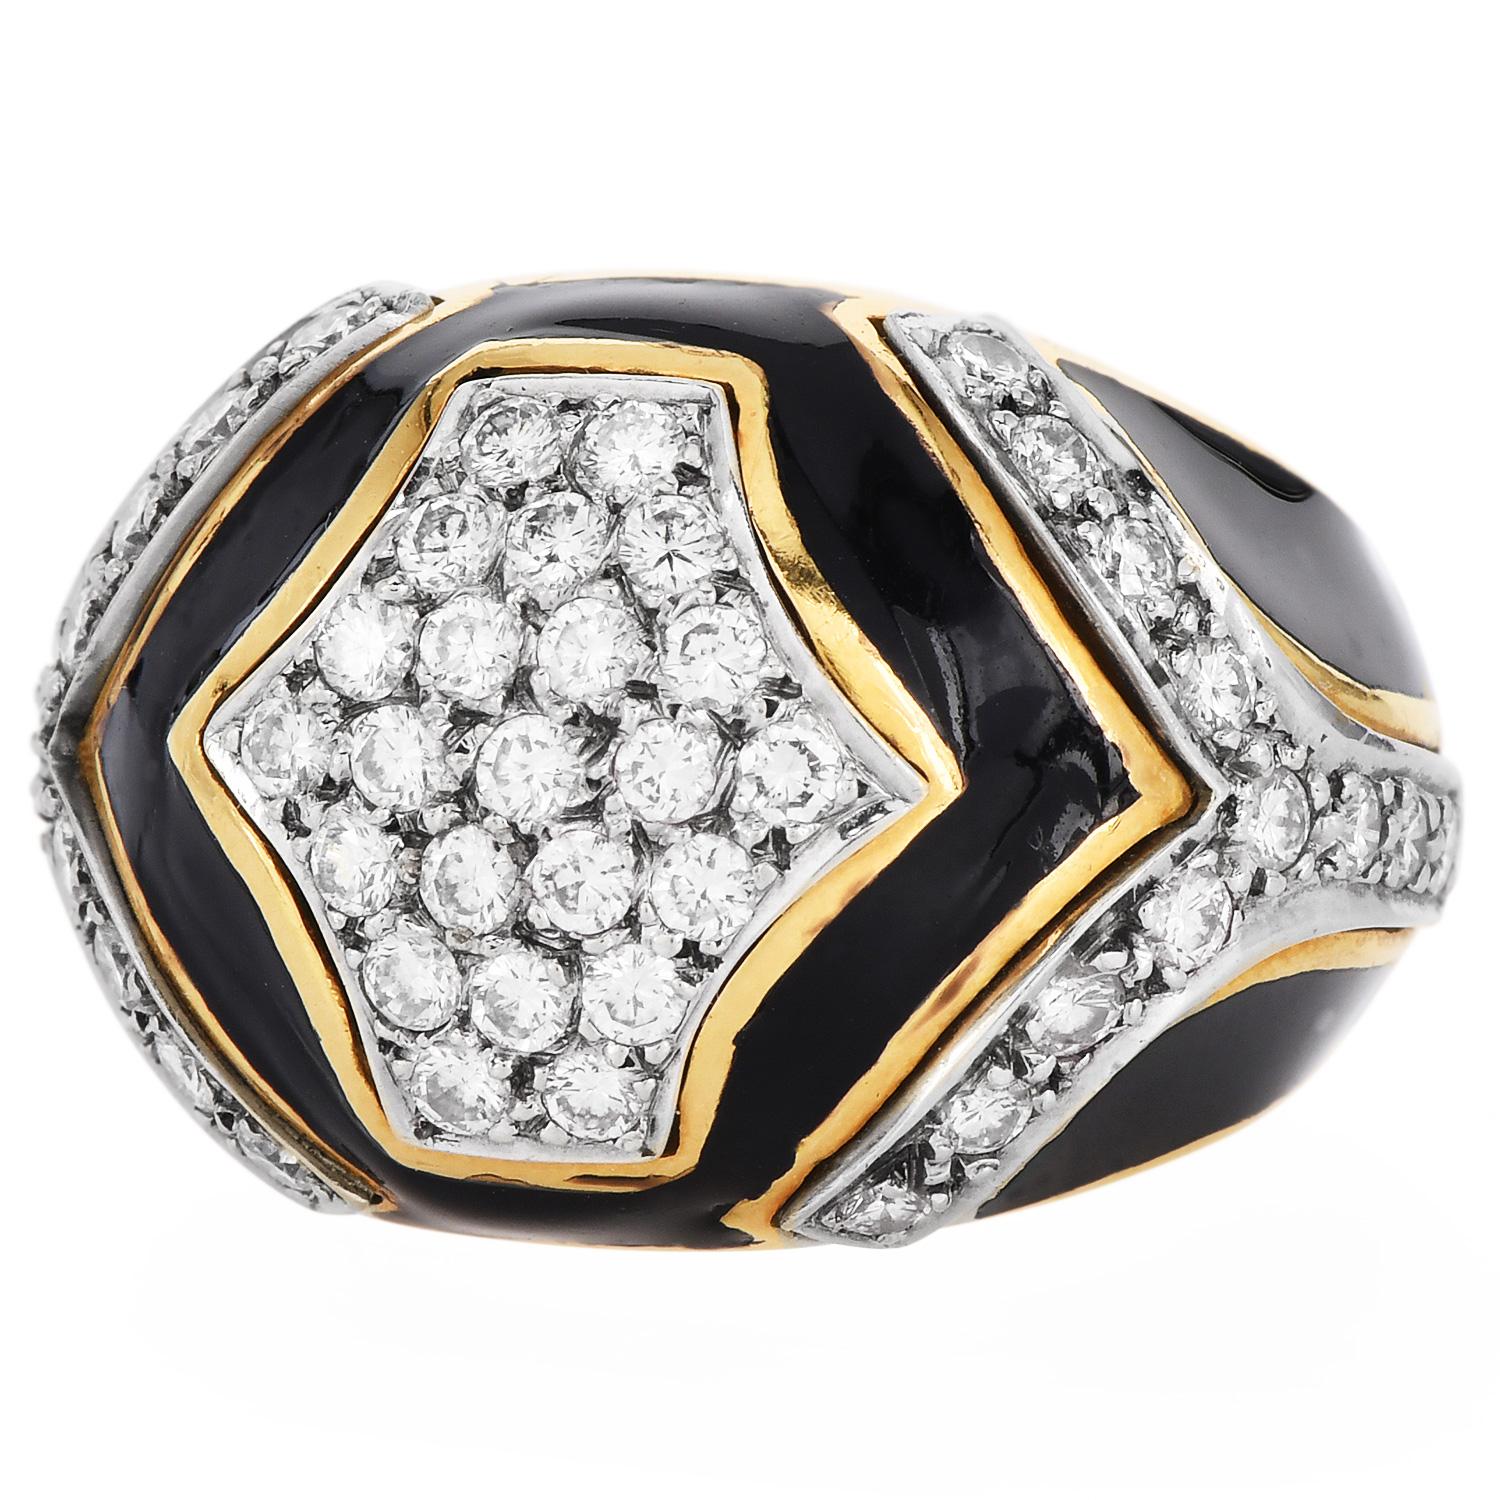 Presenting a Vintage 1970's Diamond Onyx 18K Gold Dome Statement Ring forged in 18K Yellow gold with black enamel inlay dome statement ring with natural Pave diamonds.

The diamonds are VS1-VS2 clarity and H-I color approximately 2.75 cttw

Marked: